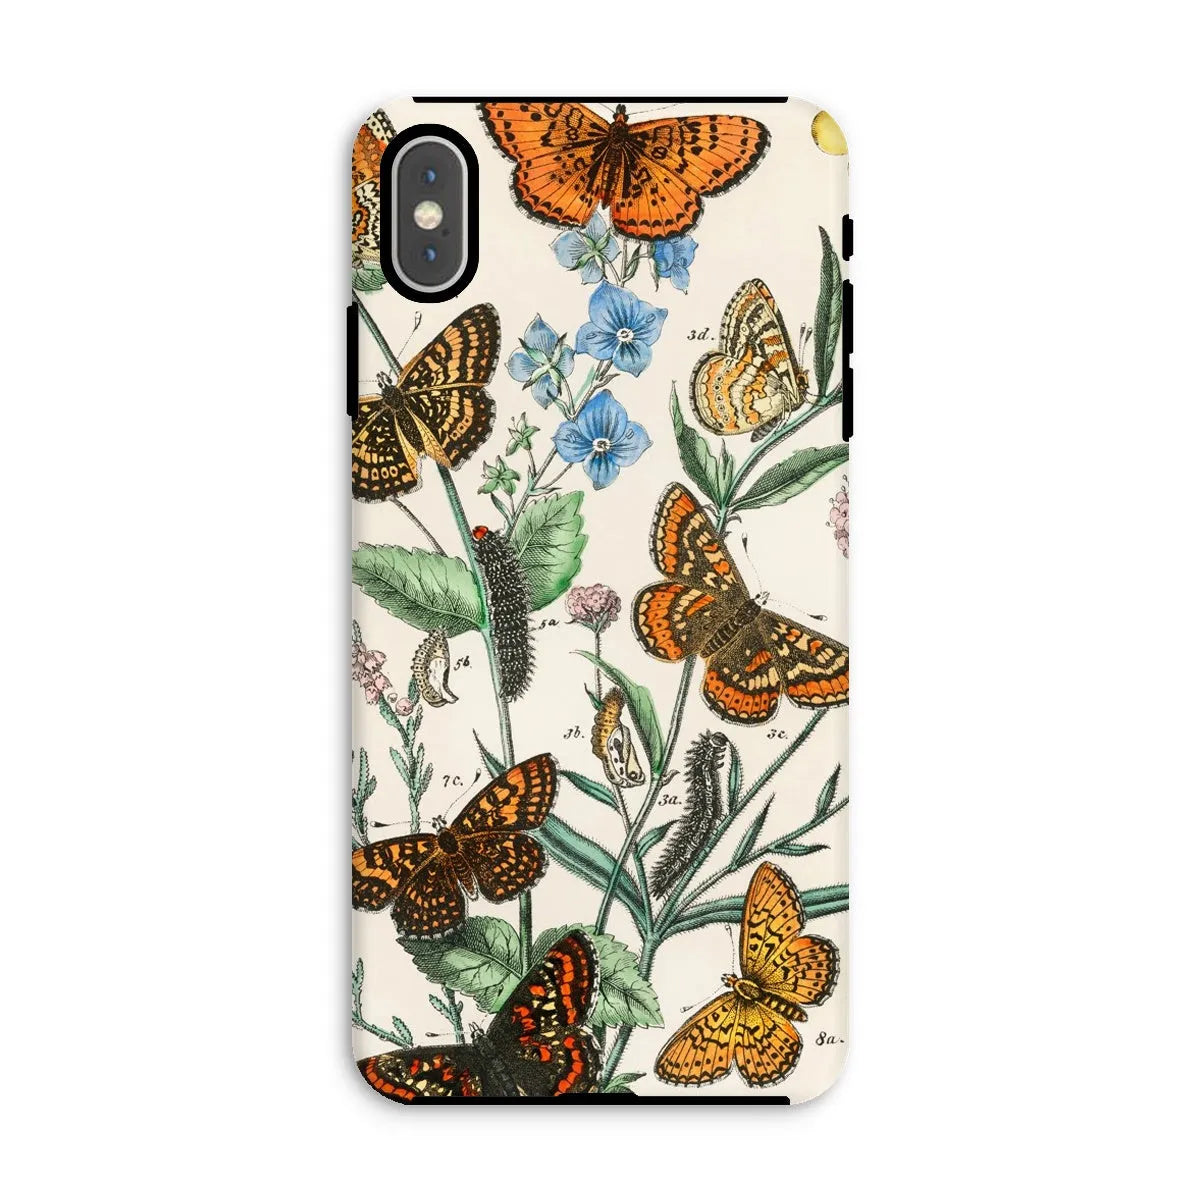 This Butterfly Aesthetic Art Phone Case - William Forsell Kirby - Iphone Xs Max / Matte - Mobile Phone Cases